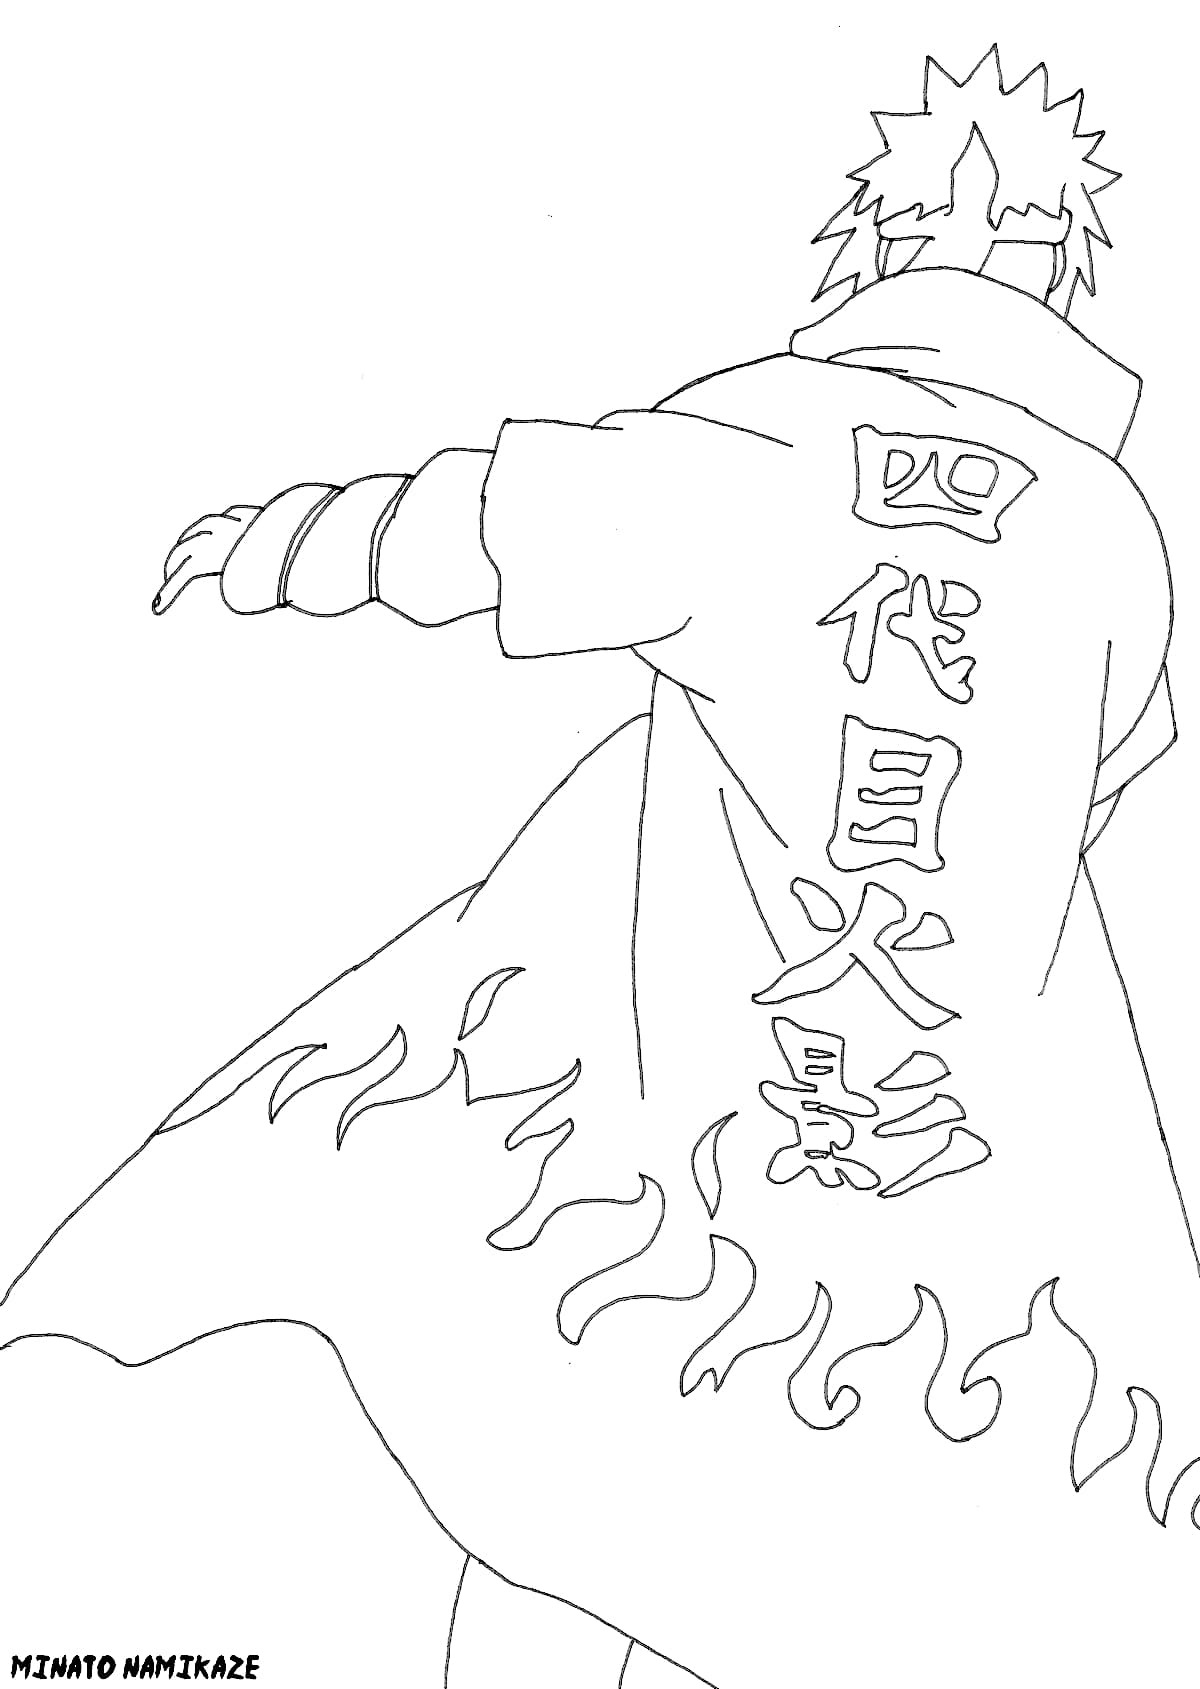 Coloring page Minato turned his back